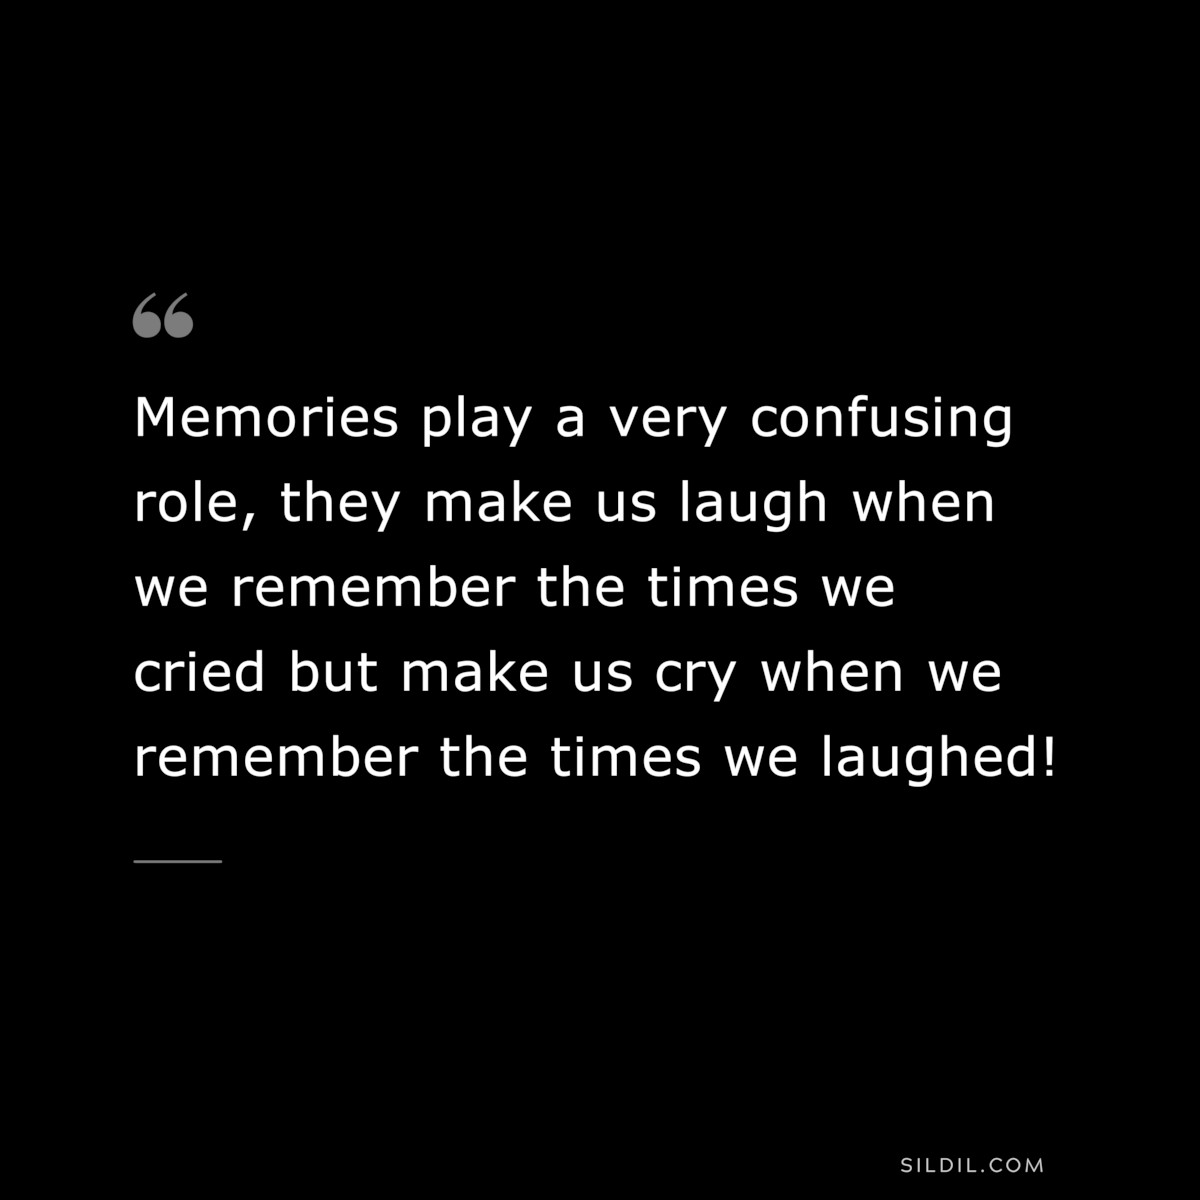 Memories play a very confusing role, they make us laugh when we remember the times we cried but make us cry when we remember the times we laughed!